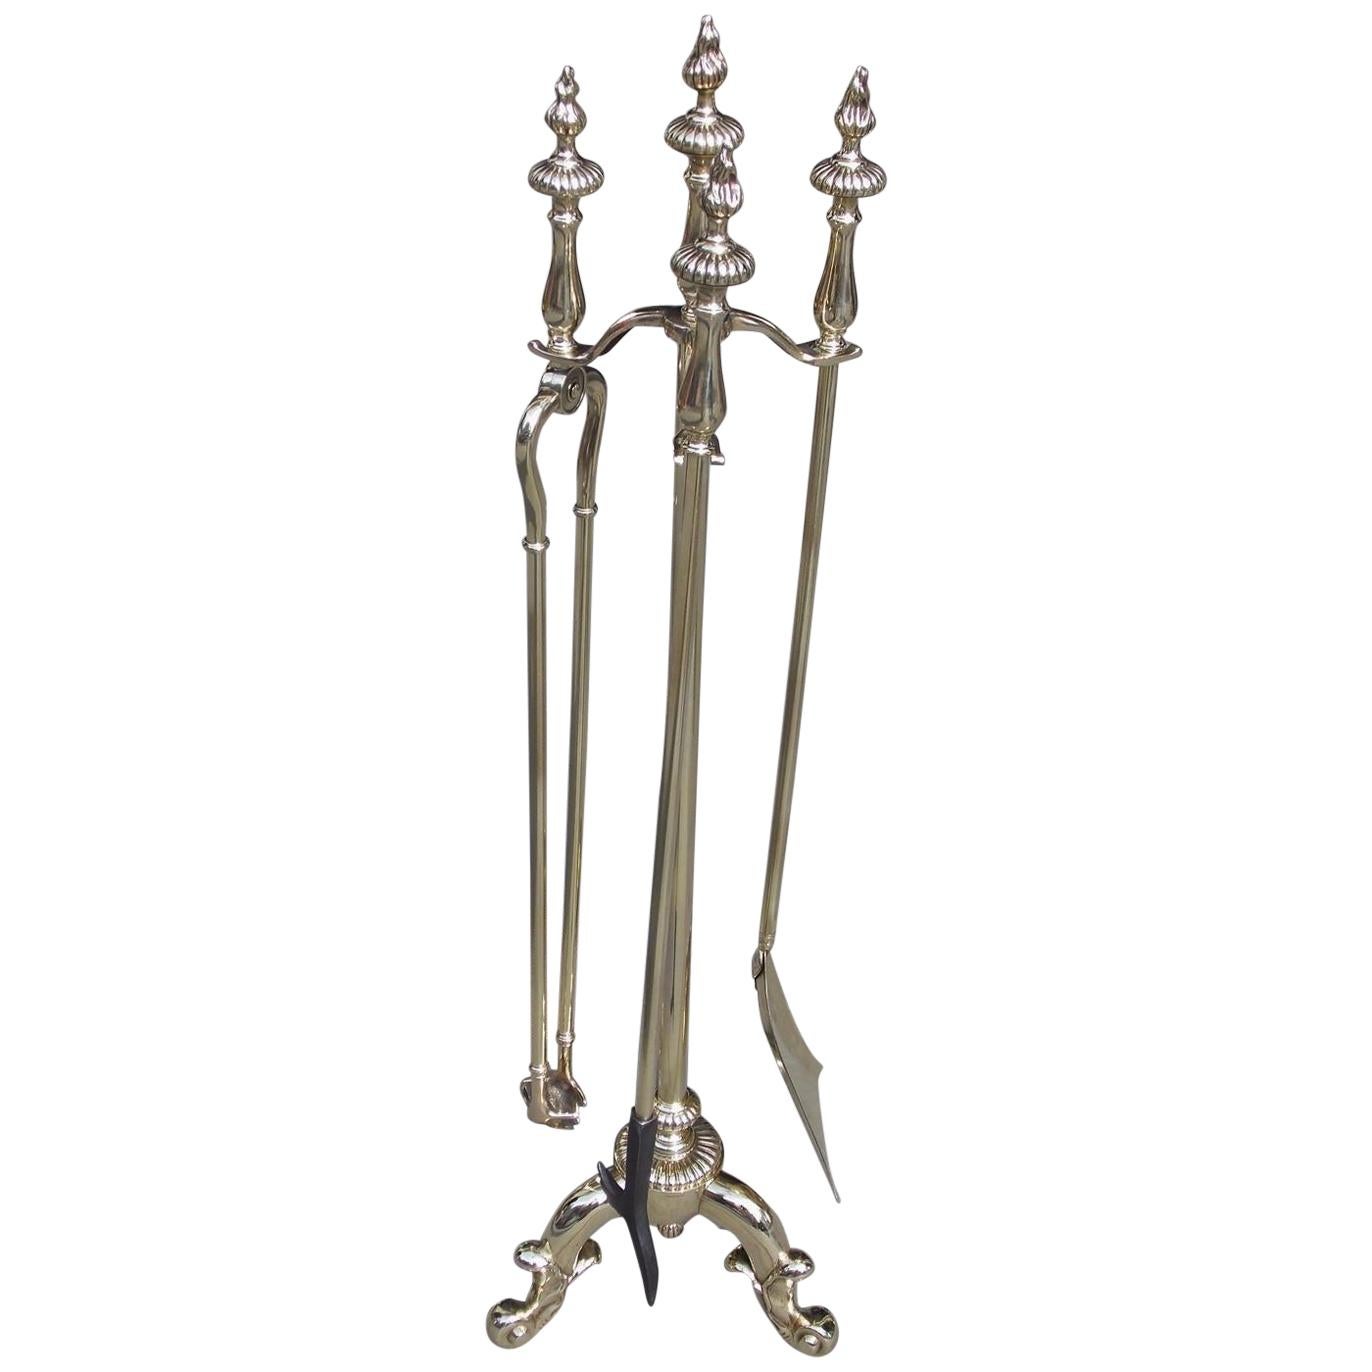 Set of Three English Brass Flame and Melon Finial Fire Tools on Stand Circa 1850